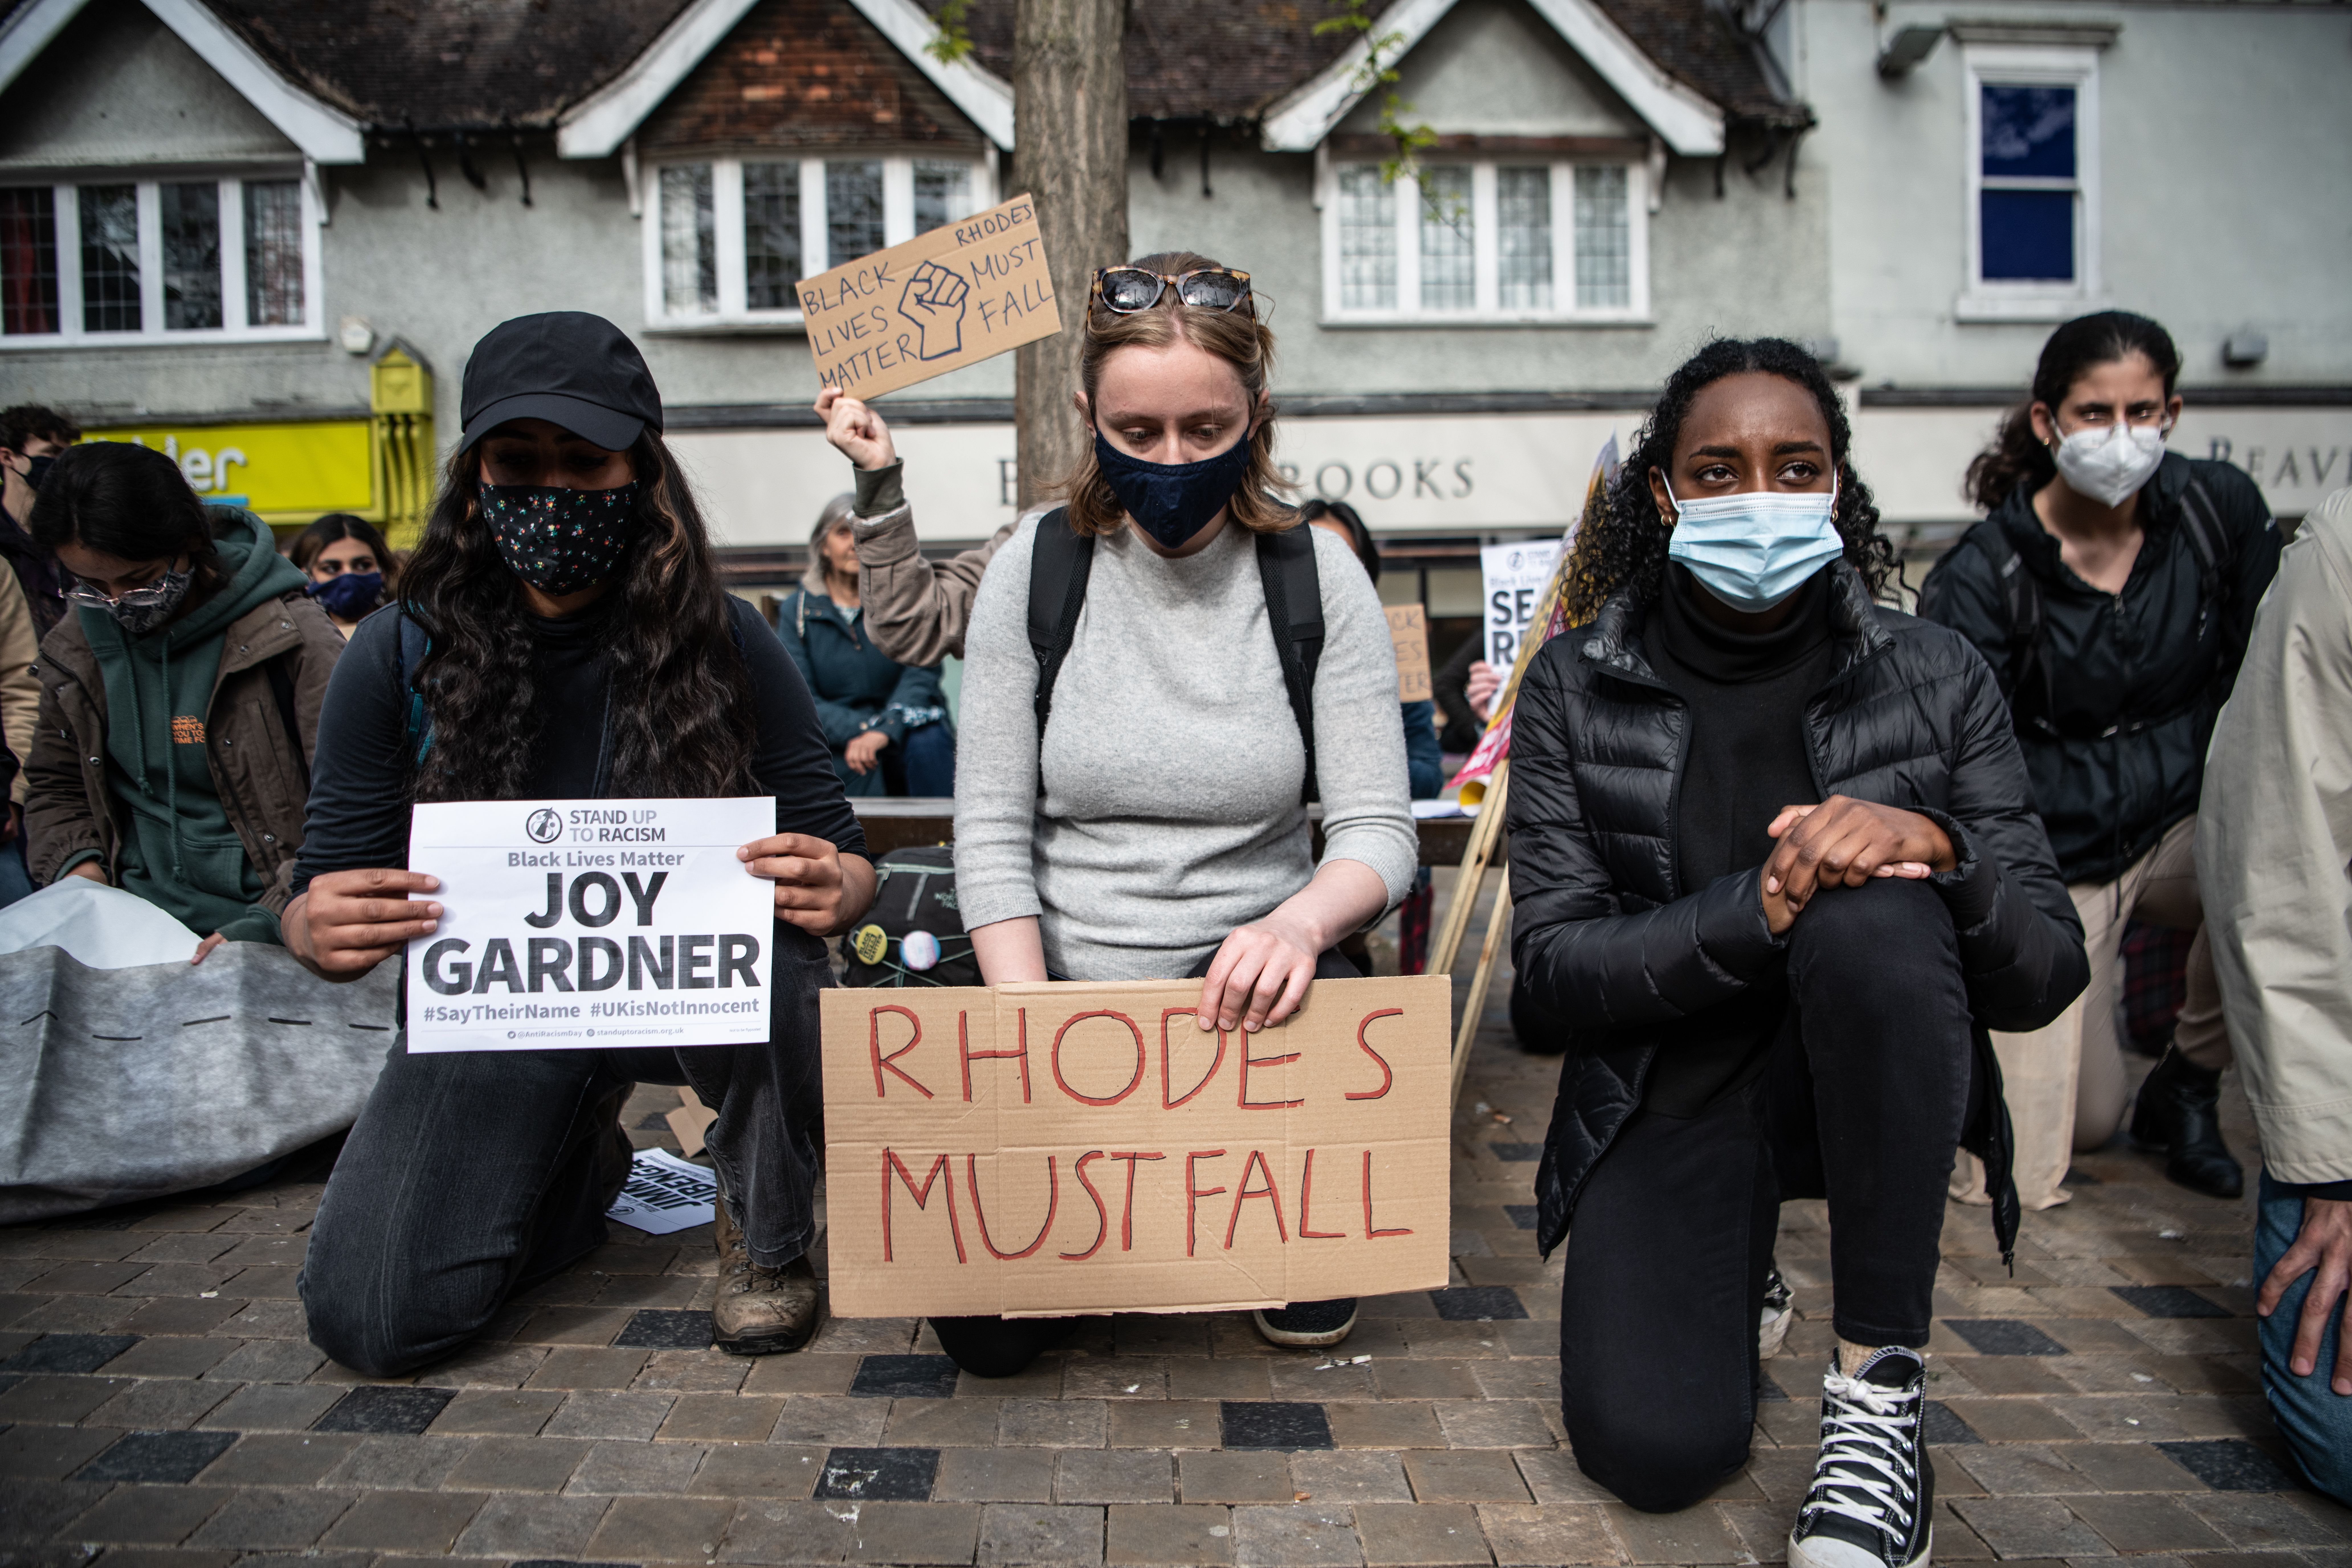 People attend an antiracism rally in Bonn Square on May 25, 2021 in Oxford, England. 